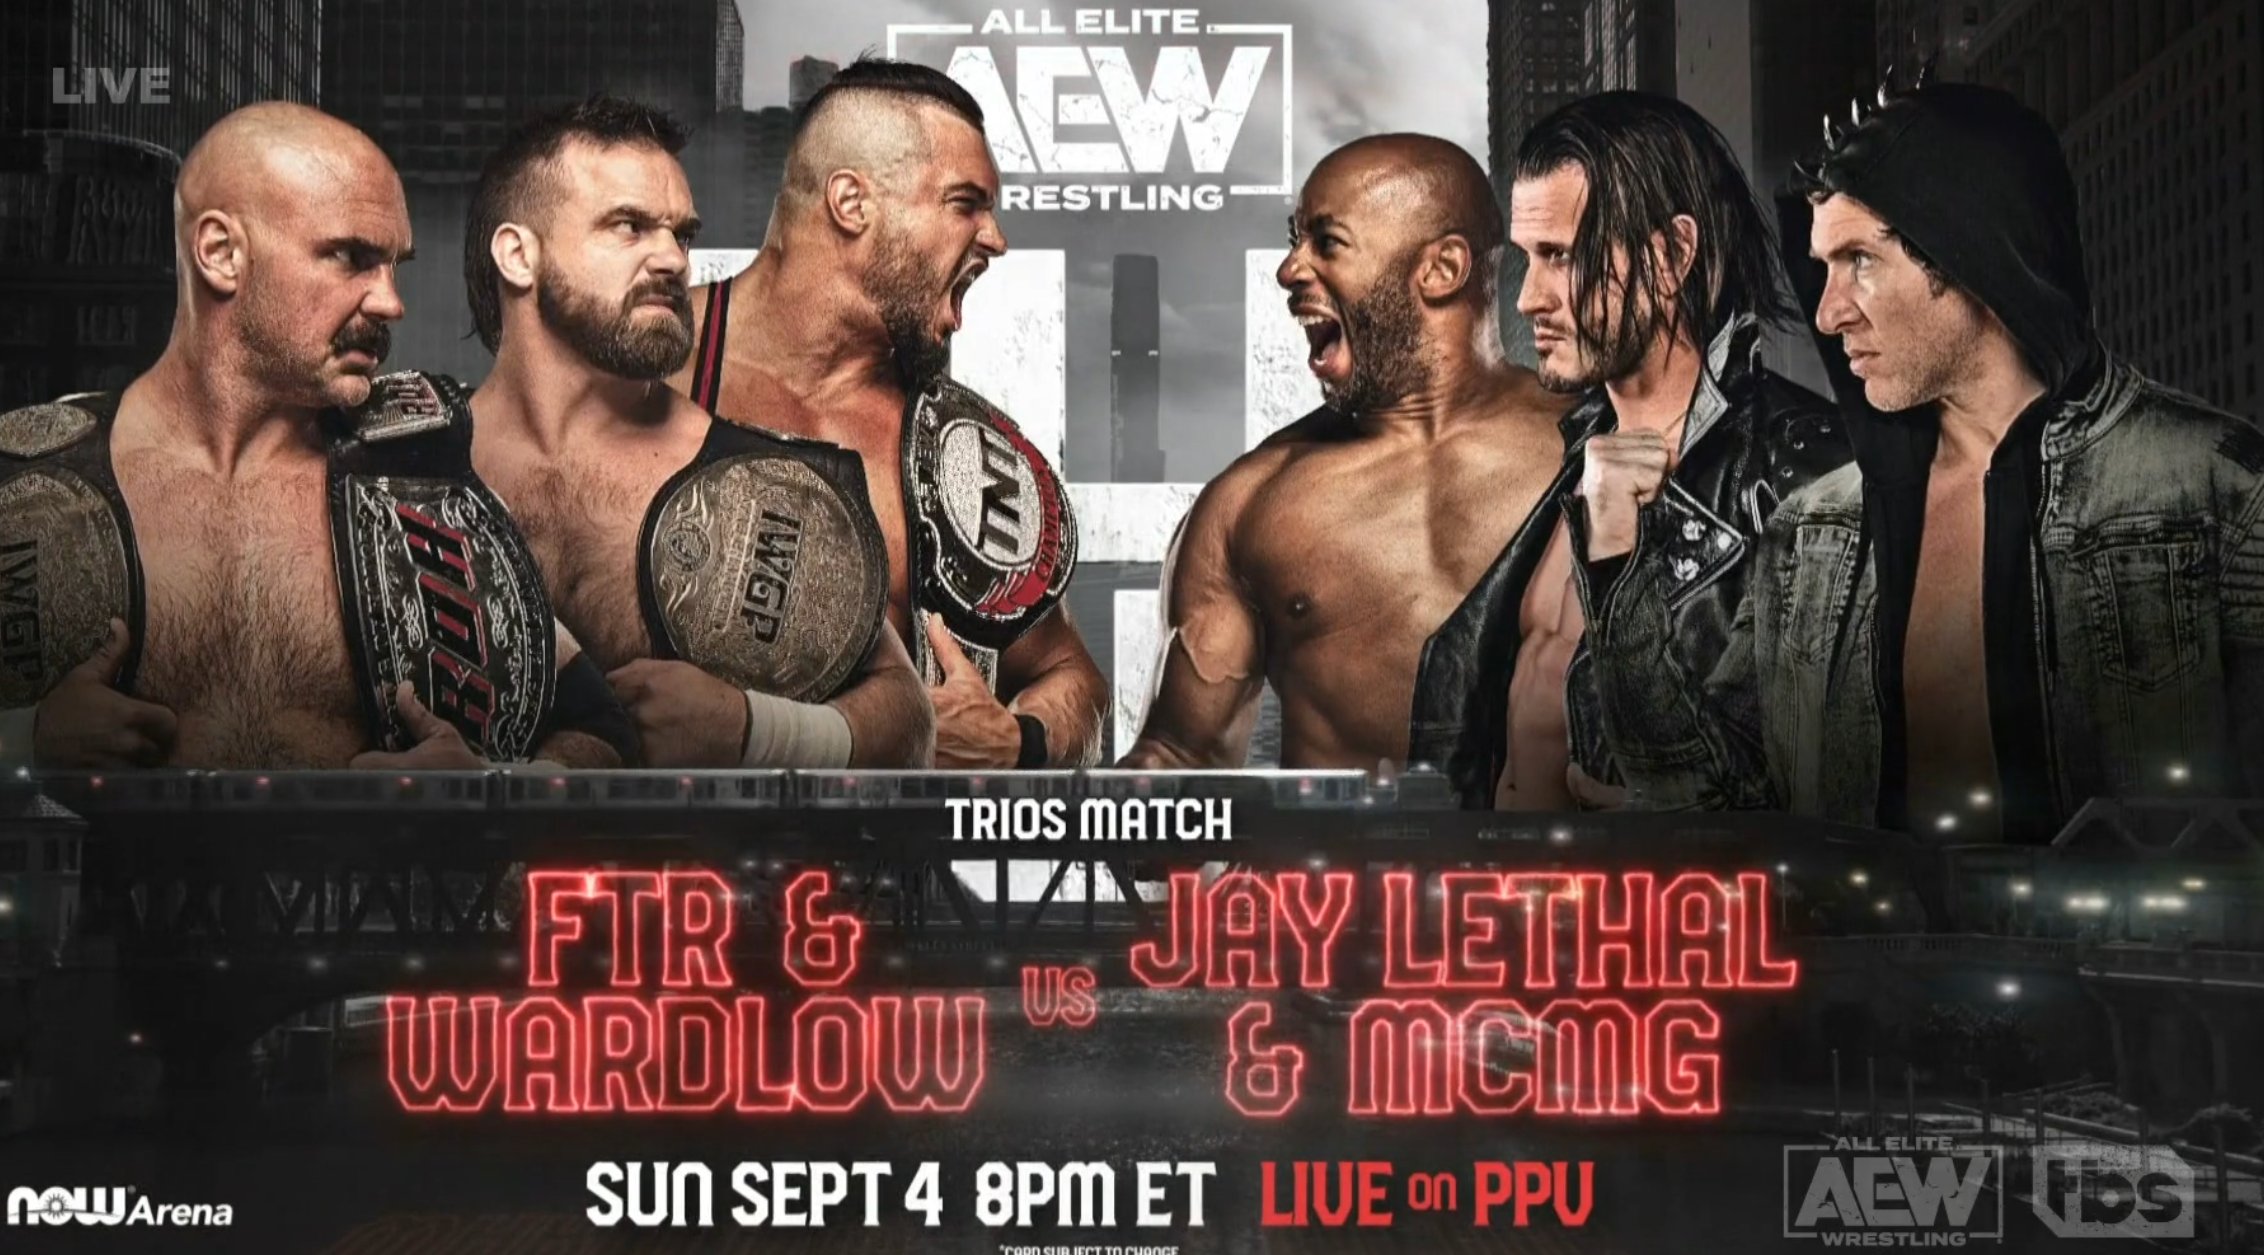 Wardlow and FTR vs Jay Lethal and MCMG